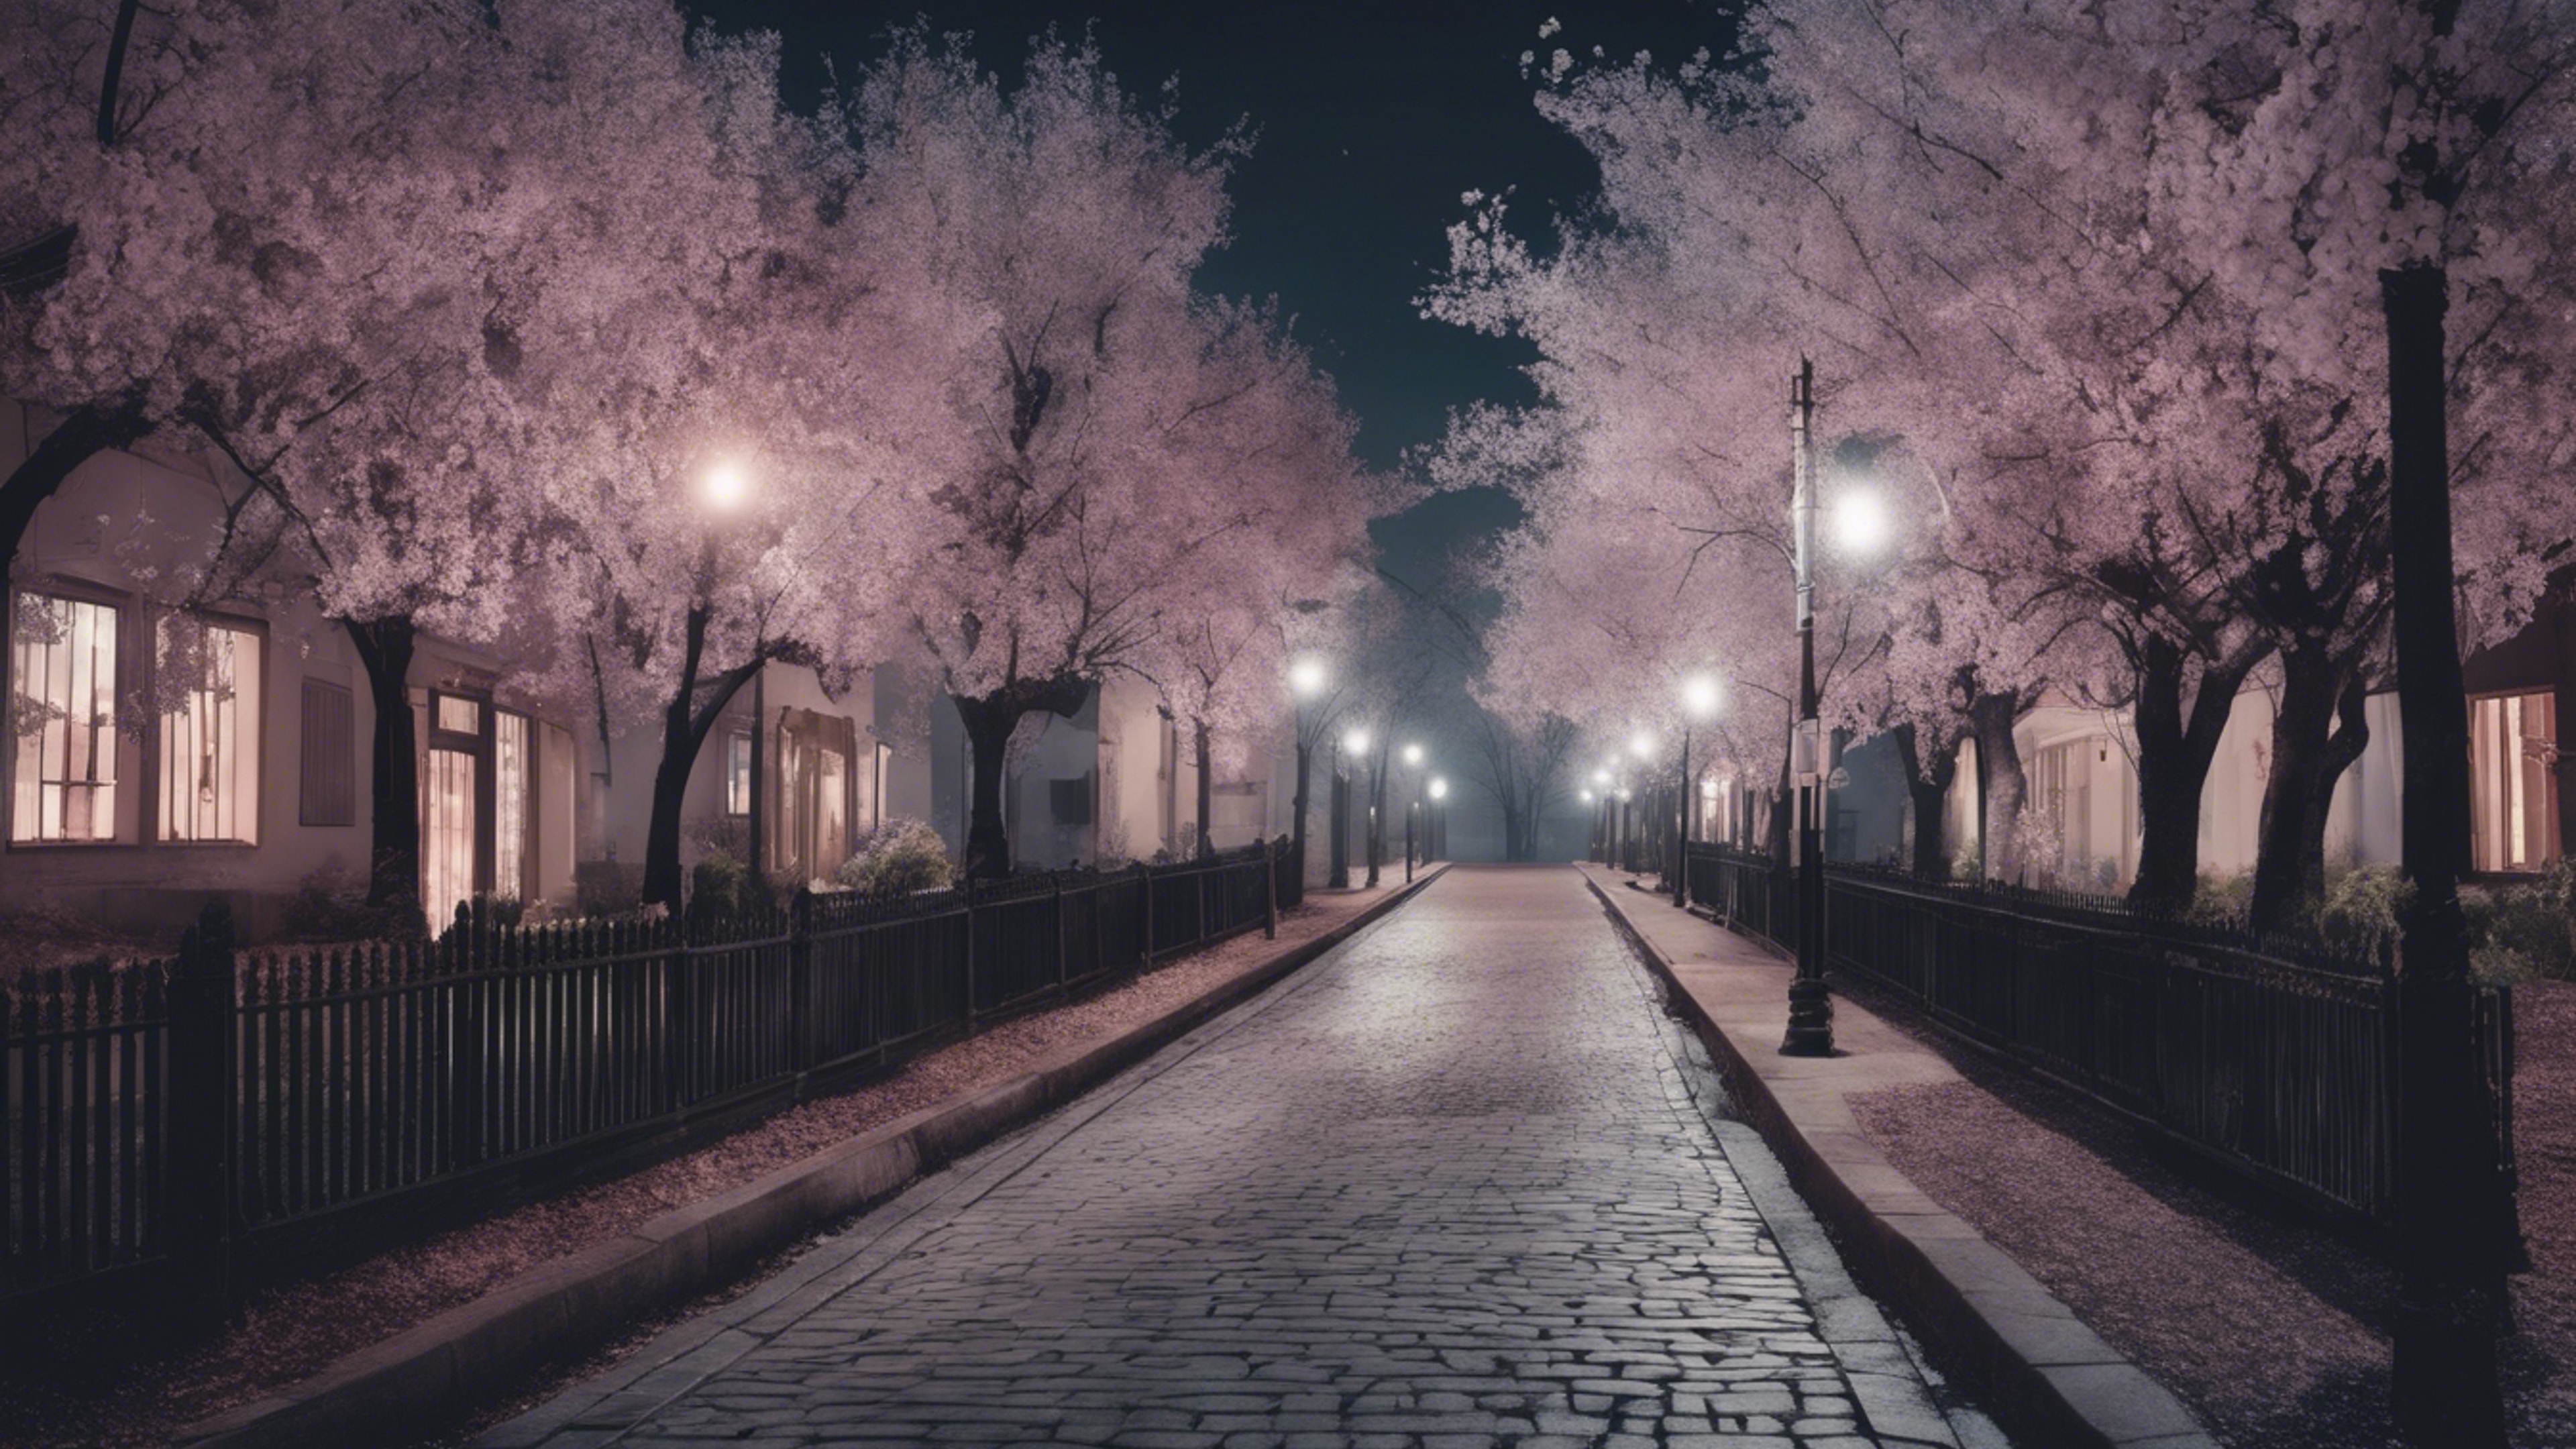 Pastel gothic street lined with black blossom trees under the ghostly night sky.壁紙[dc1e1b7f0a0c4838b6b6]